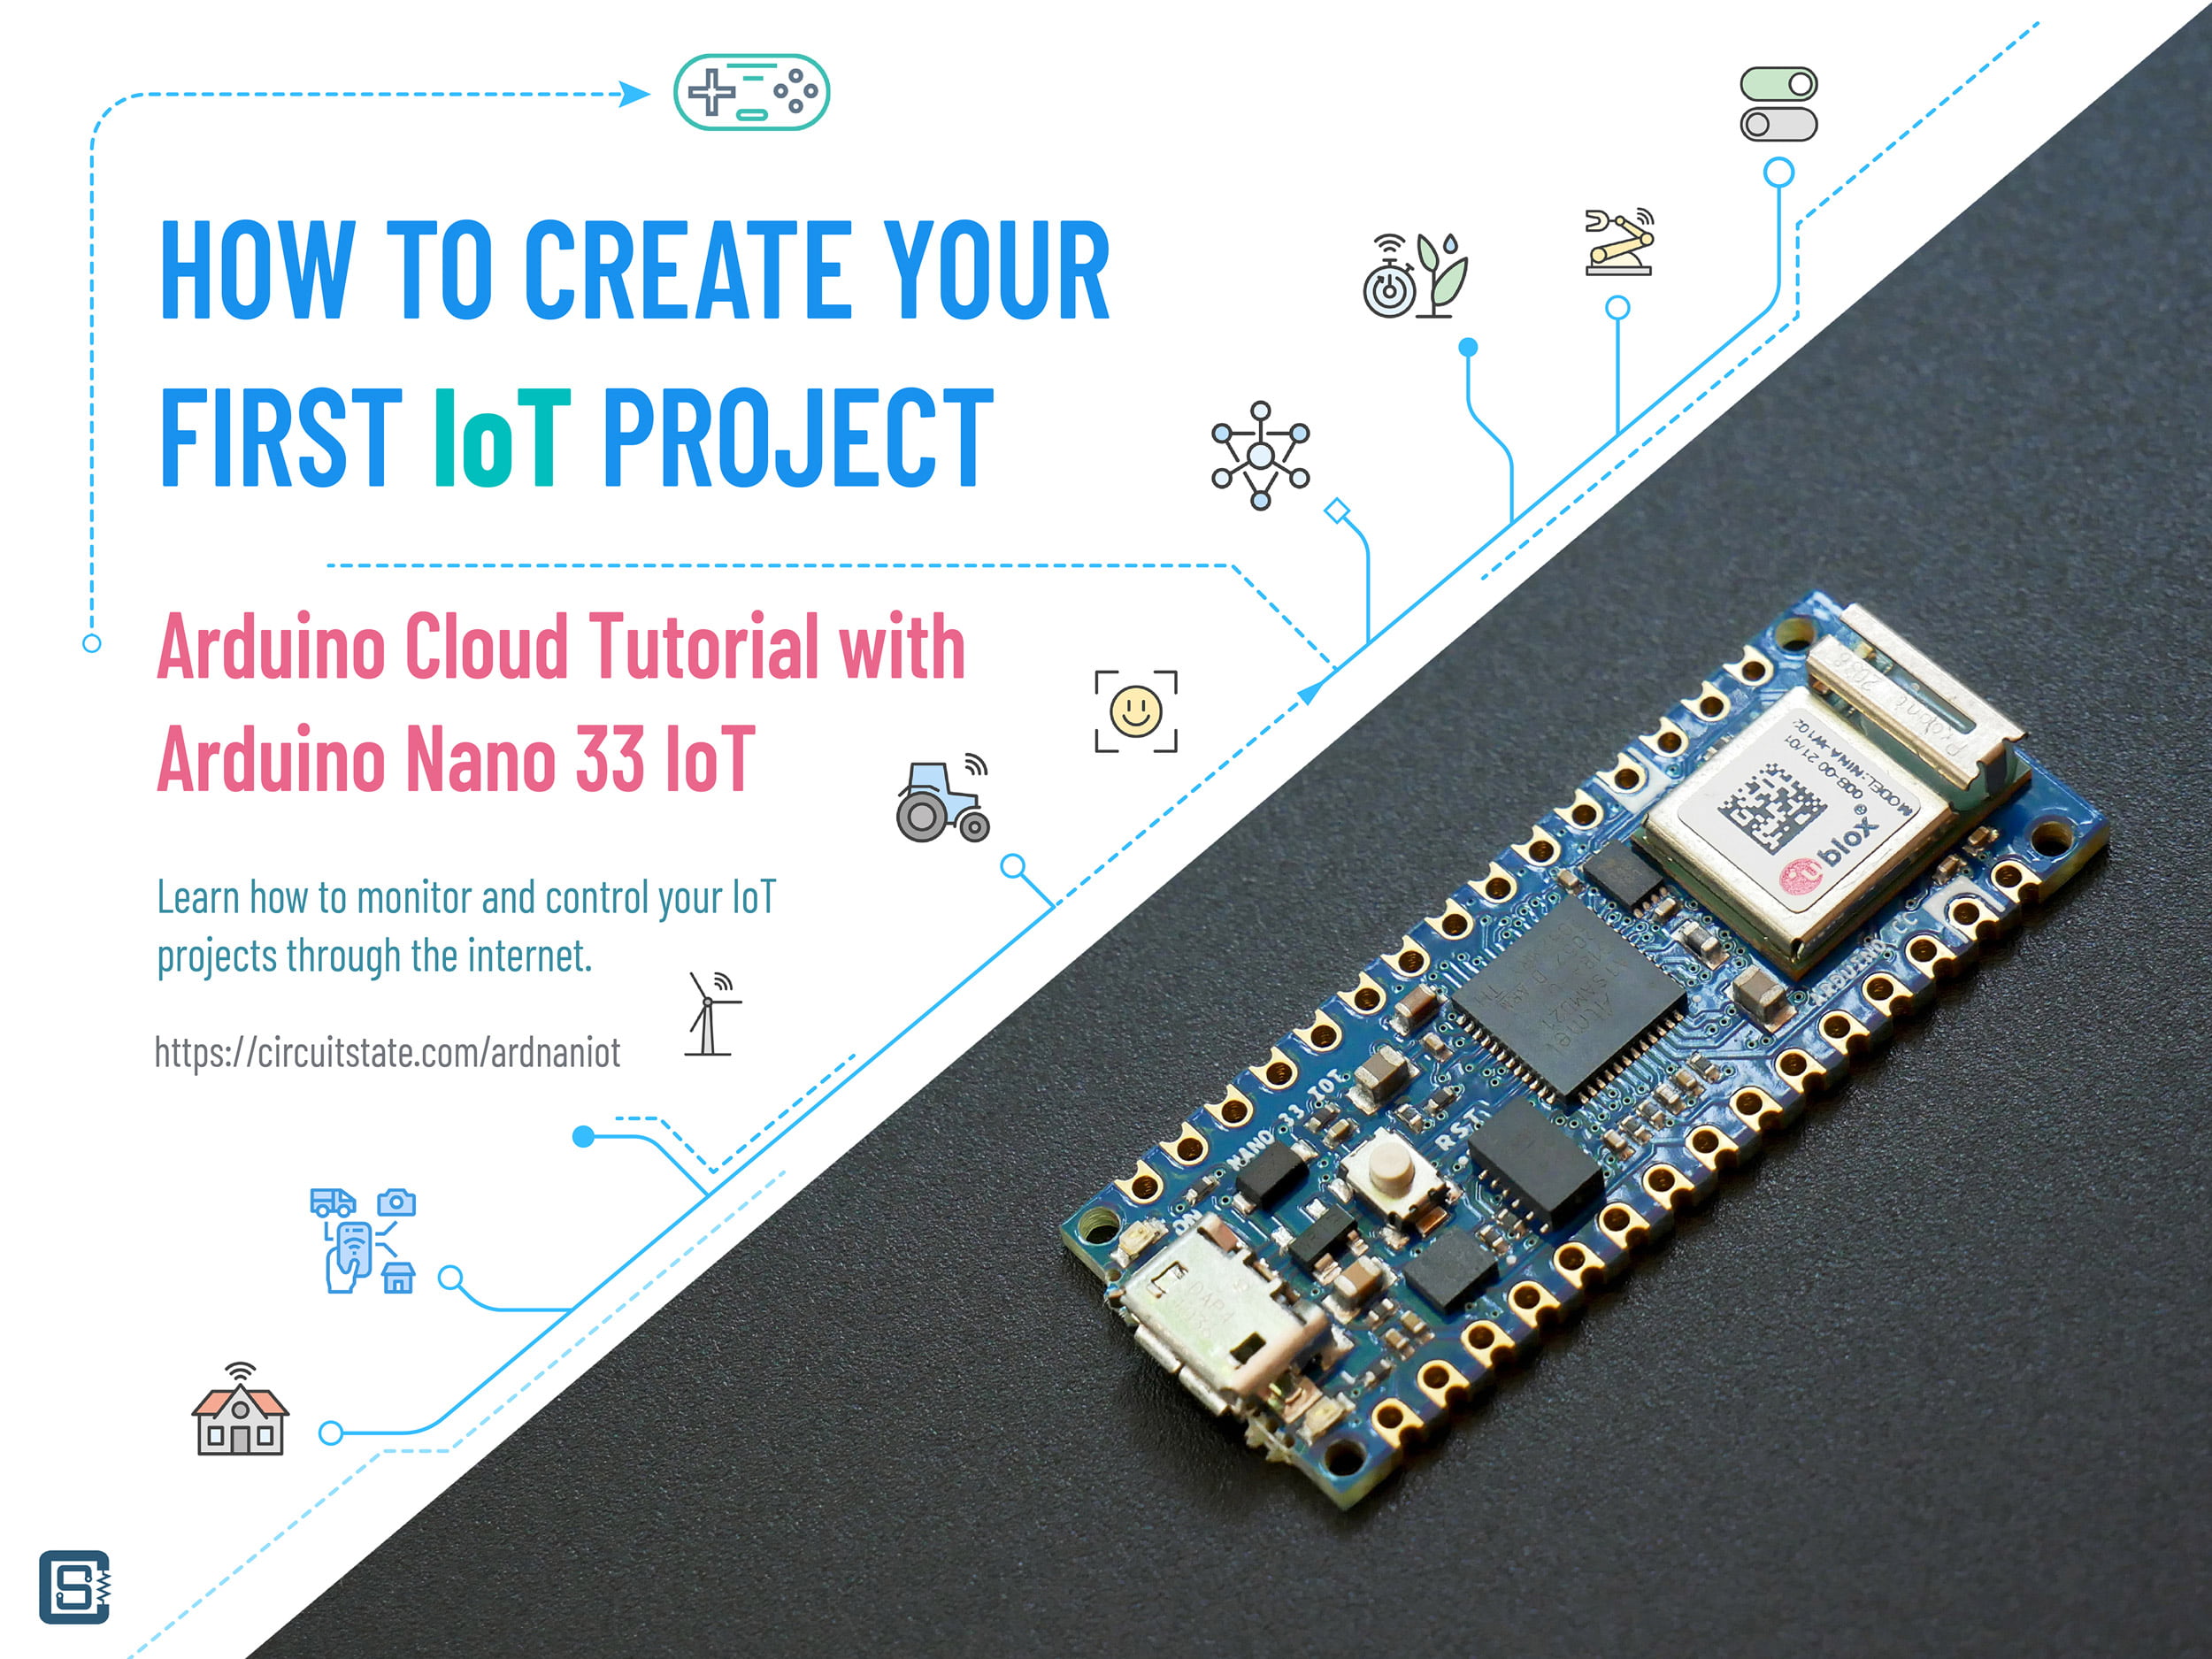 How-To-Create-Your-First-IoT-Project-Arduino-IoT-Cloud-Tutorial-with-Arduino-Nano-33-IoT-CIRCUITSTATE-Featured-Image-01-2-2